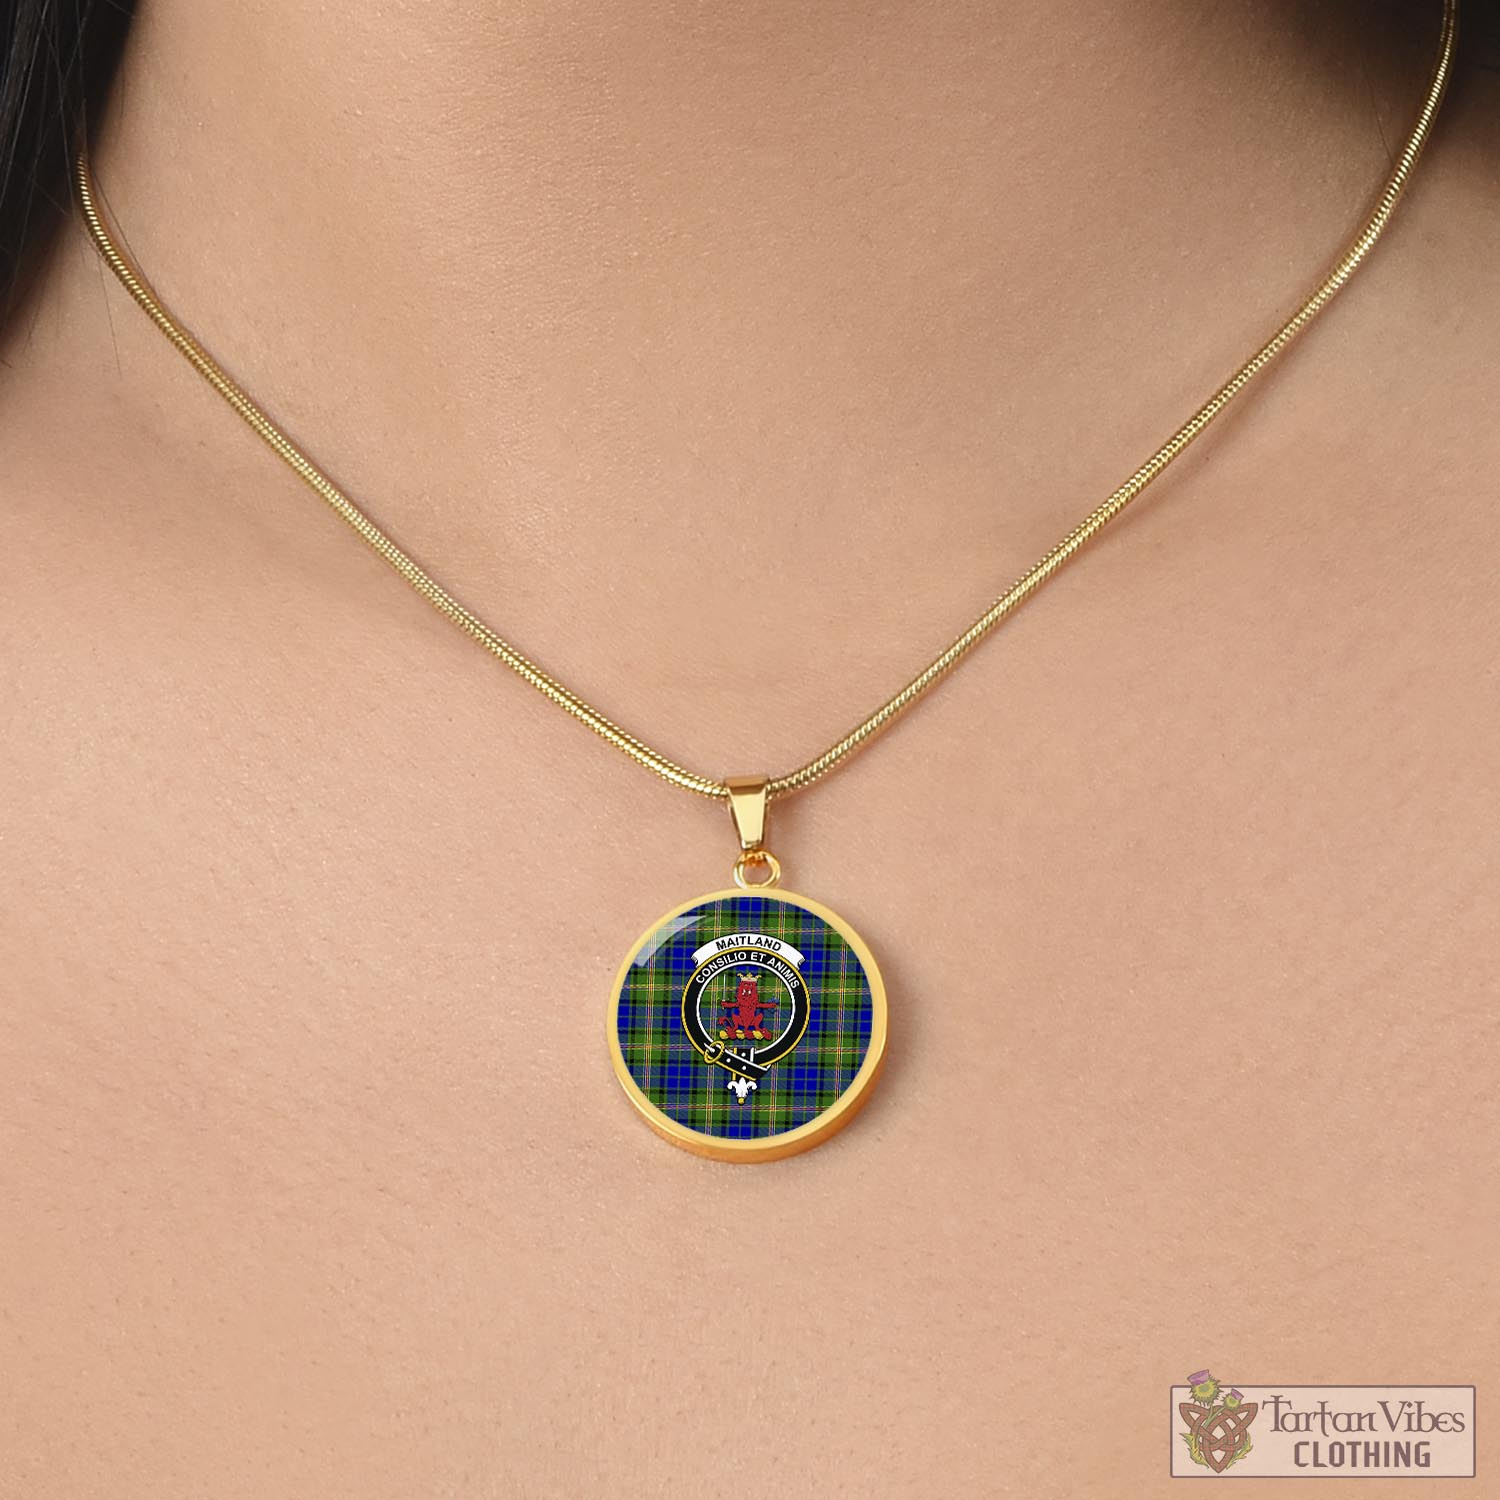 Tartan Vibes Clothing Maitland Tartan Circle Necklace with Family Crest